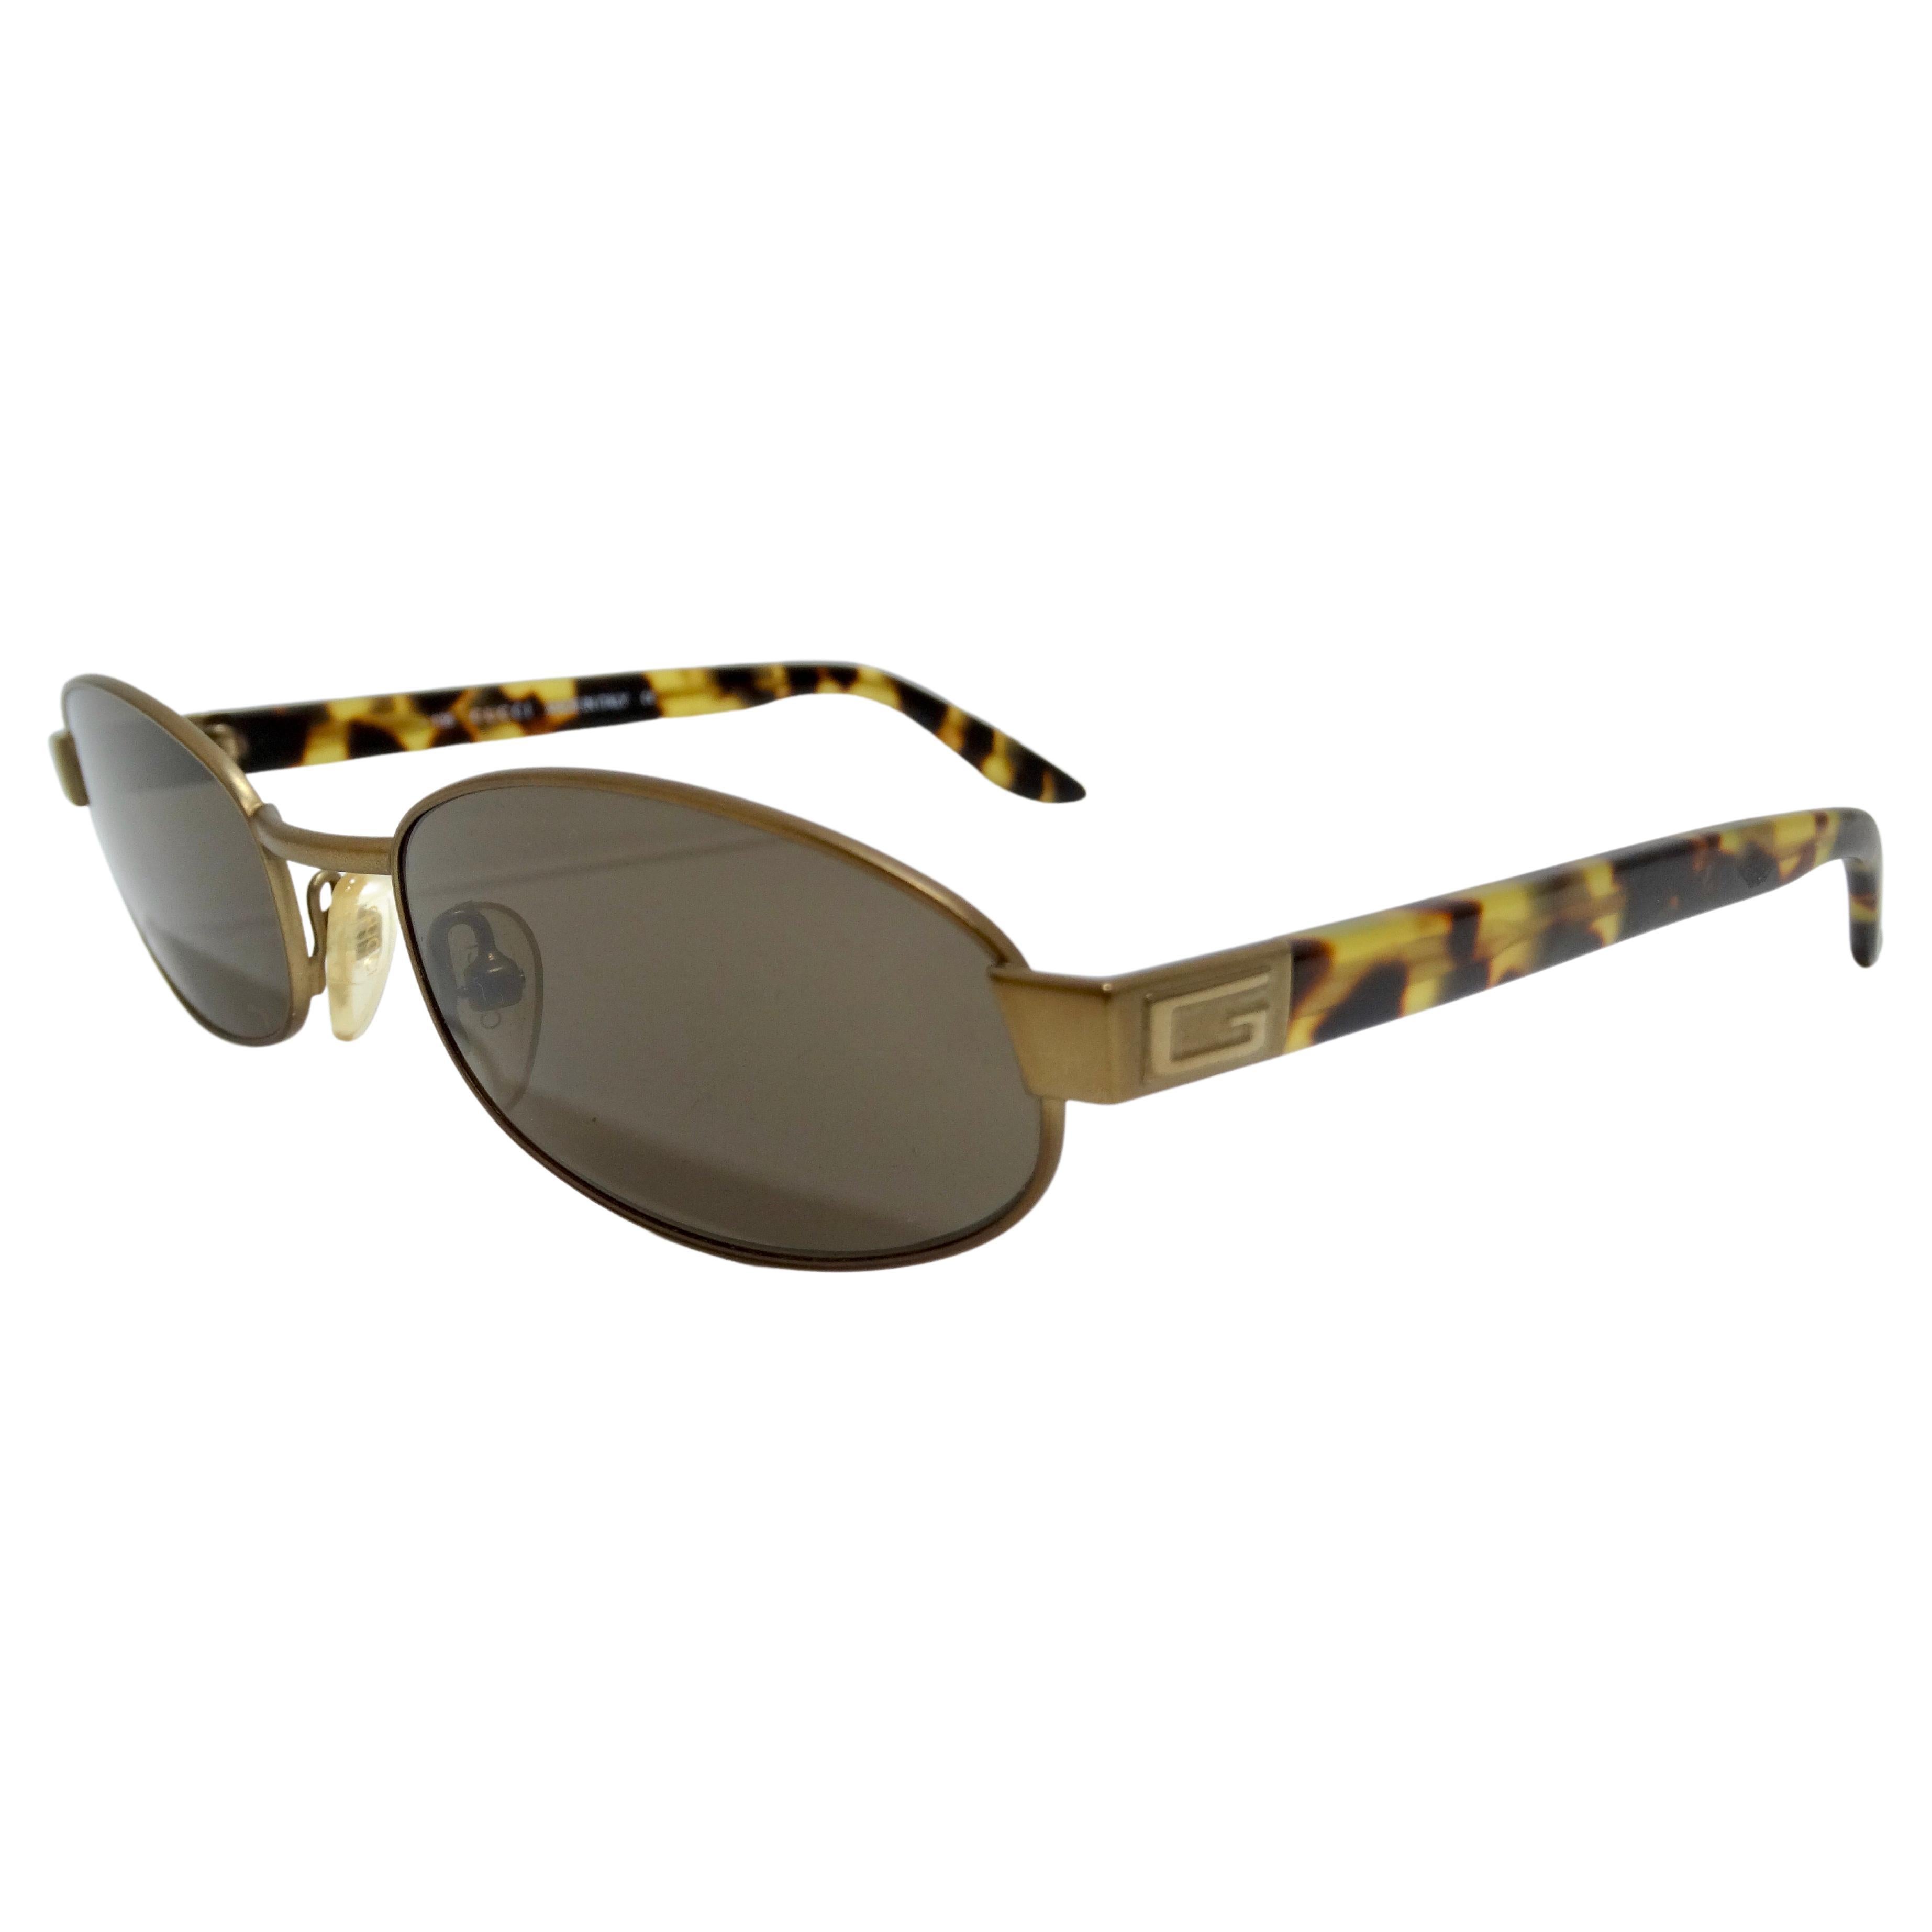 Tom Ford for Gucci Gold & Tortoise Shell Oval Sunglasses